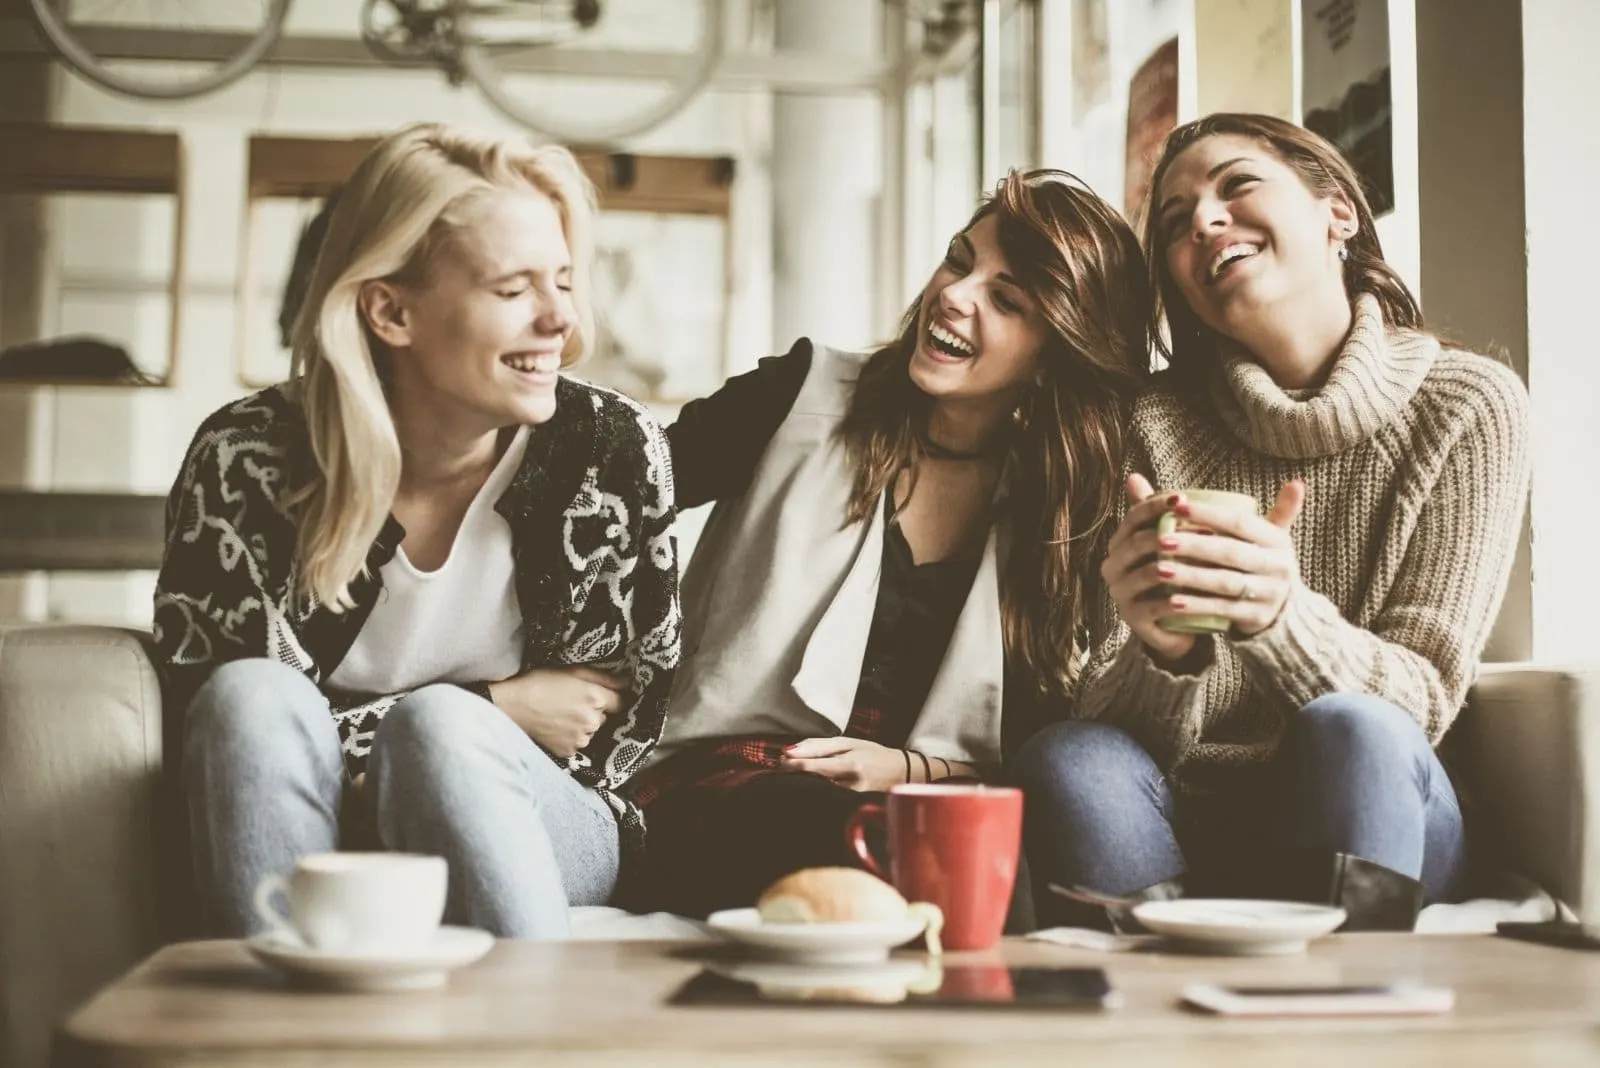 group of girl friends having a good time together drinking coffee inside the cafe